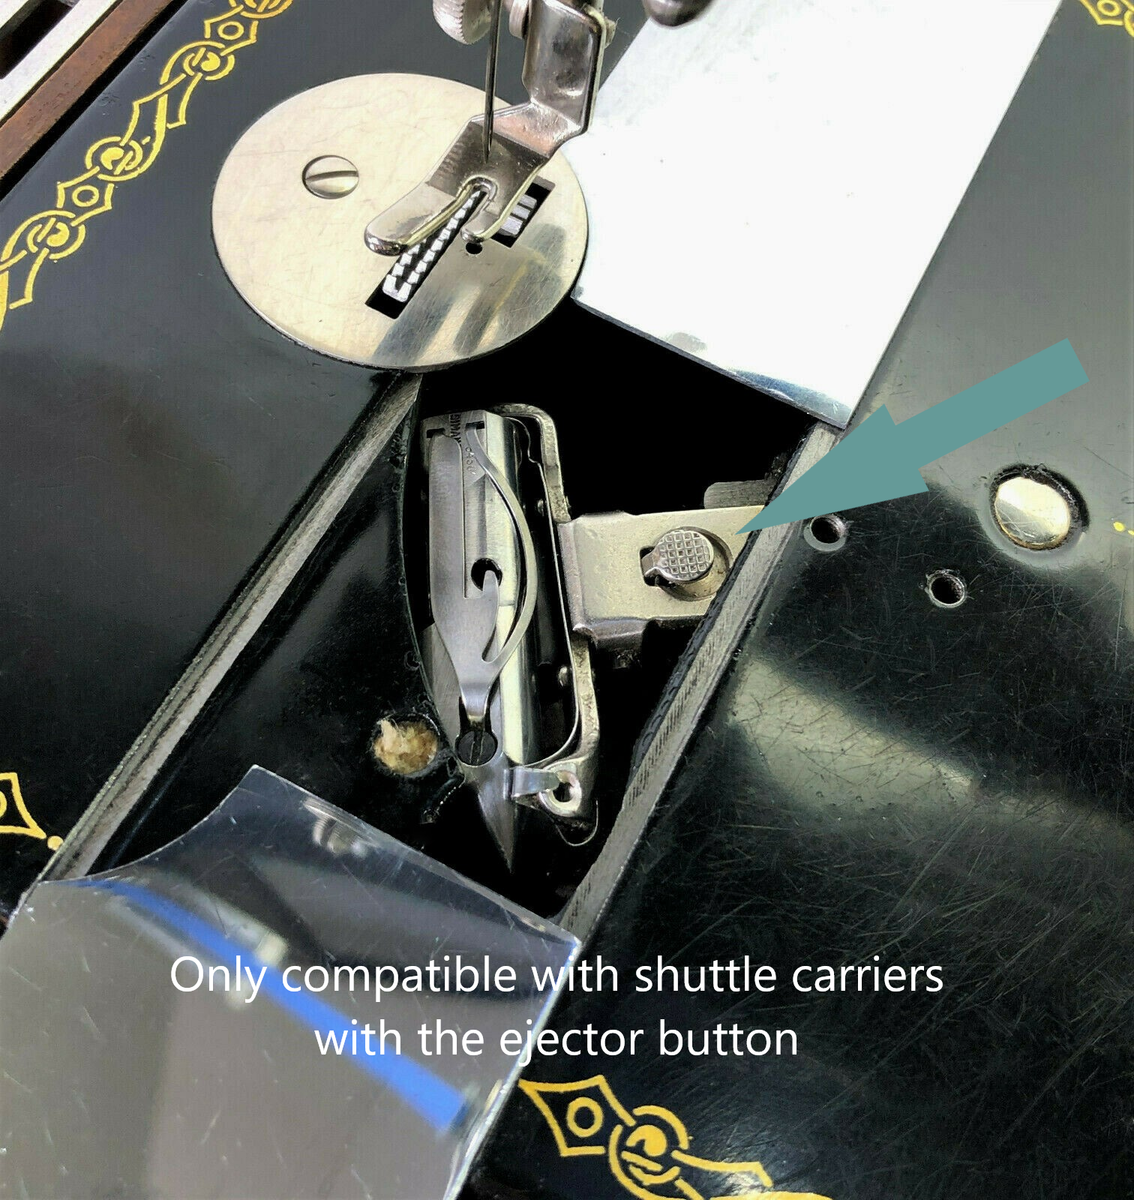 How to open a Singer sewing machine case lid without the key – and